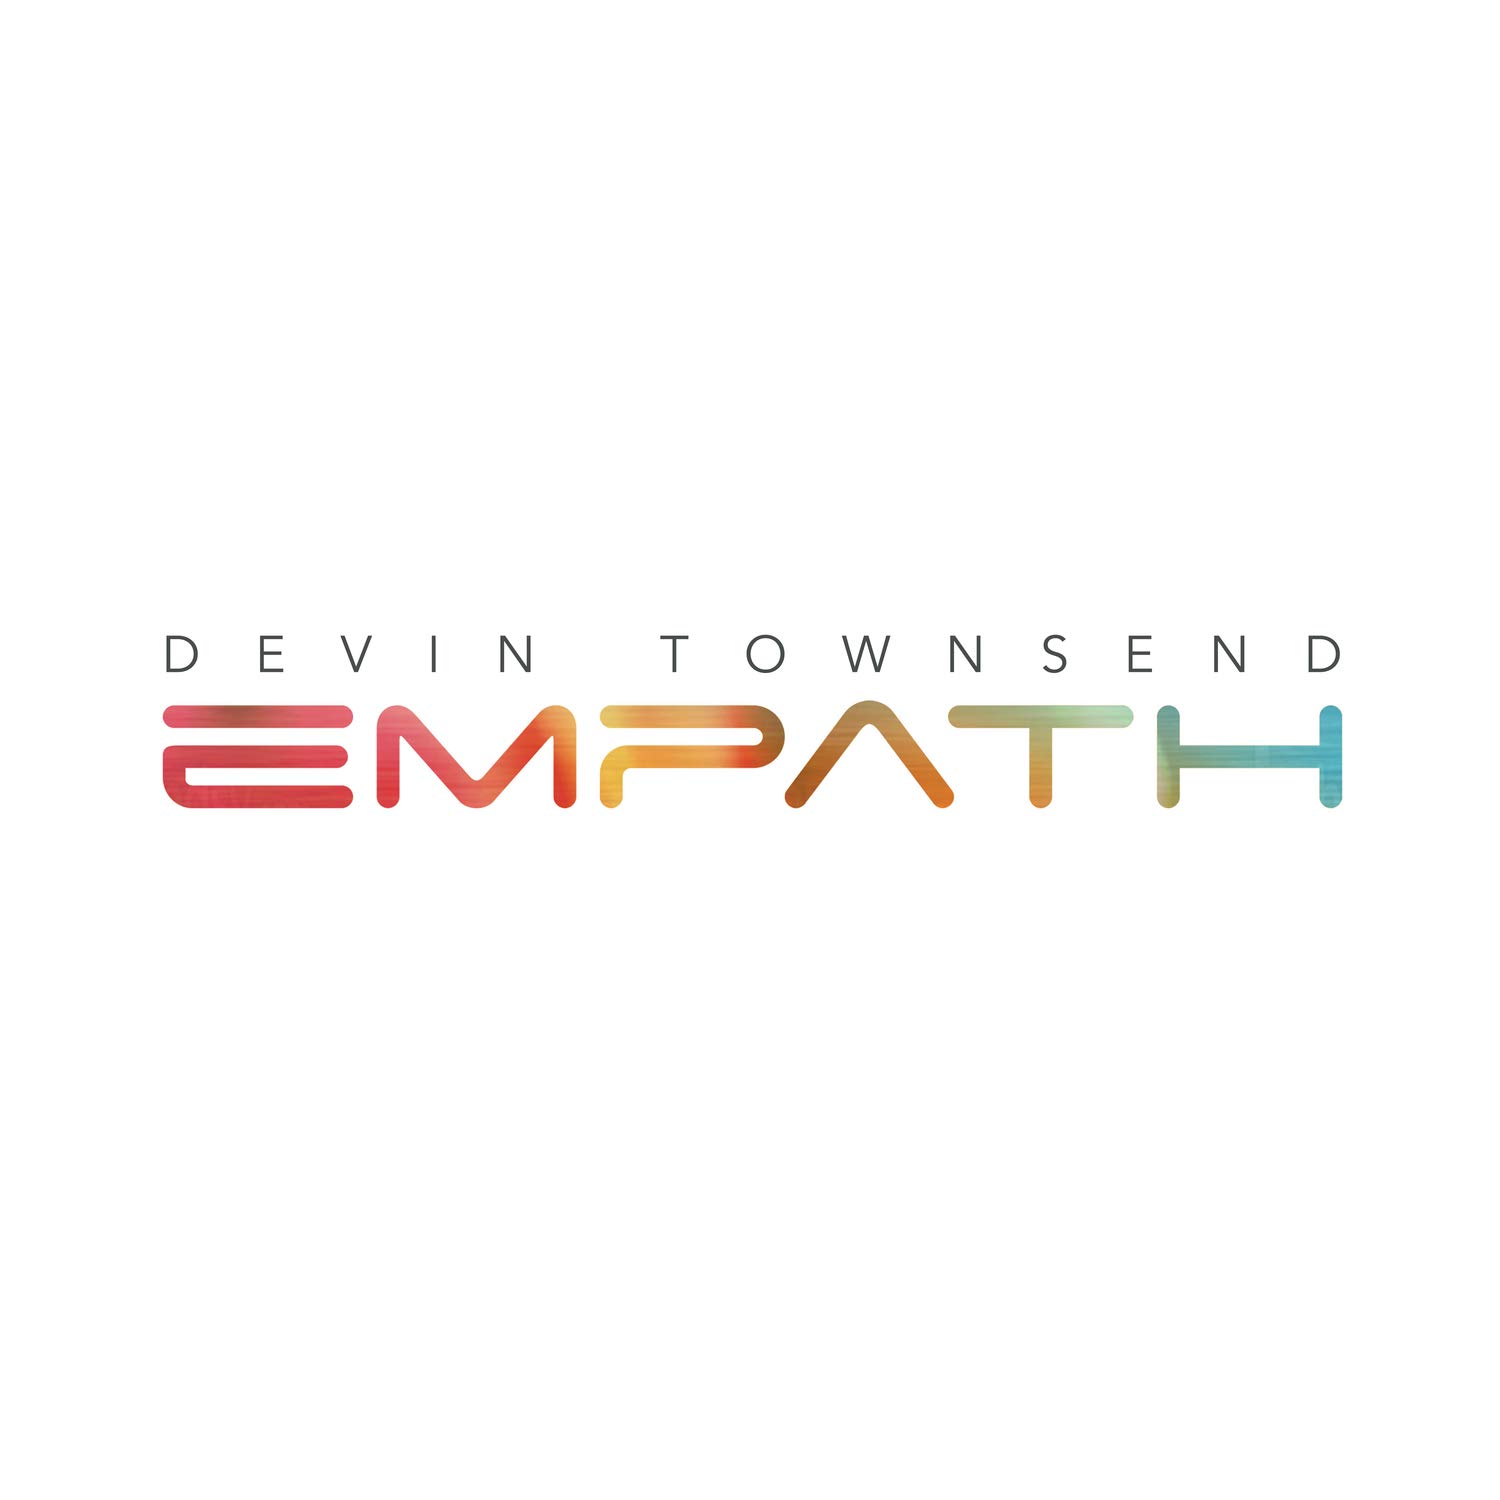 Devin Townsend “Empath” a review